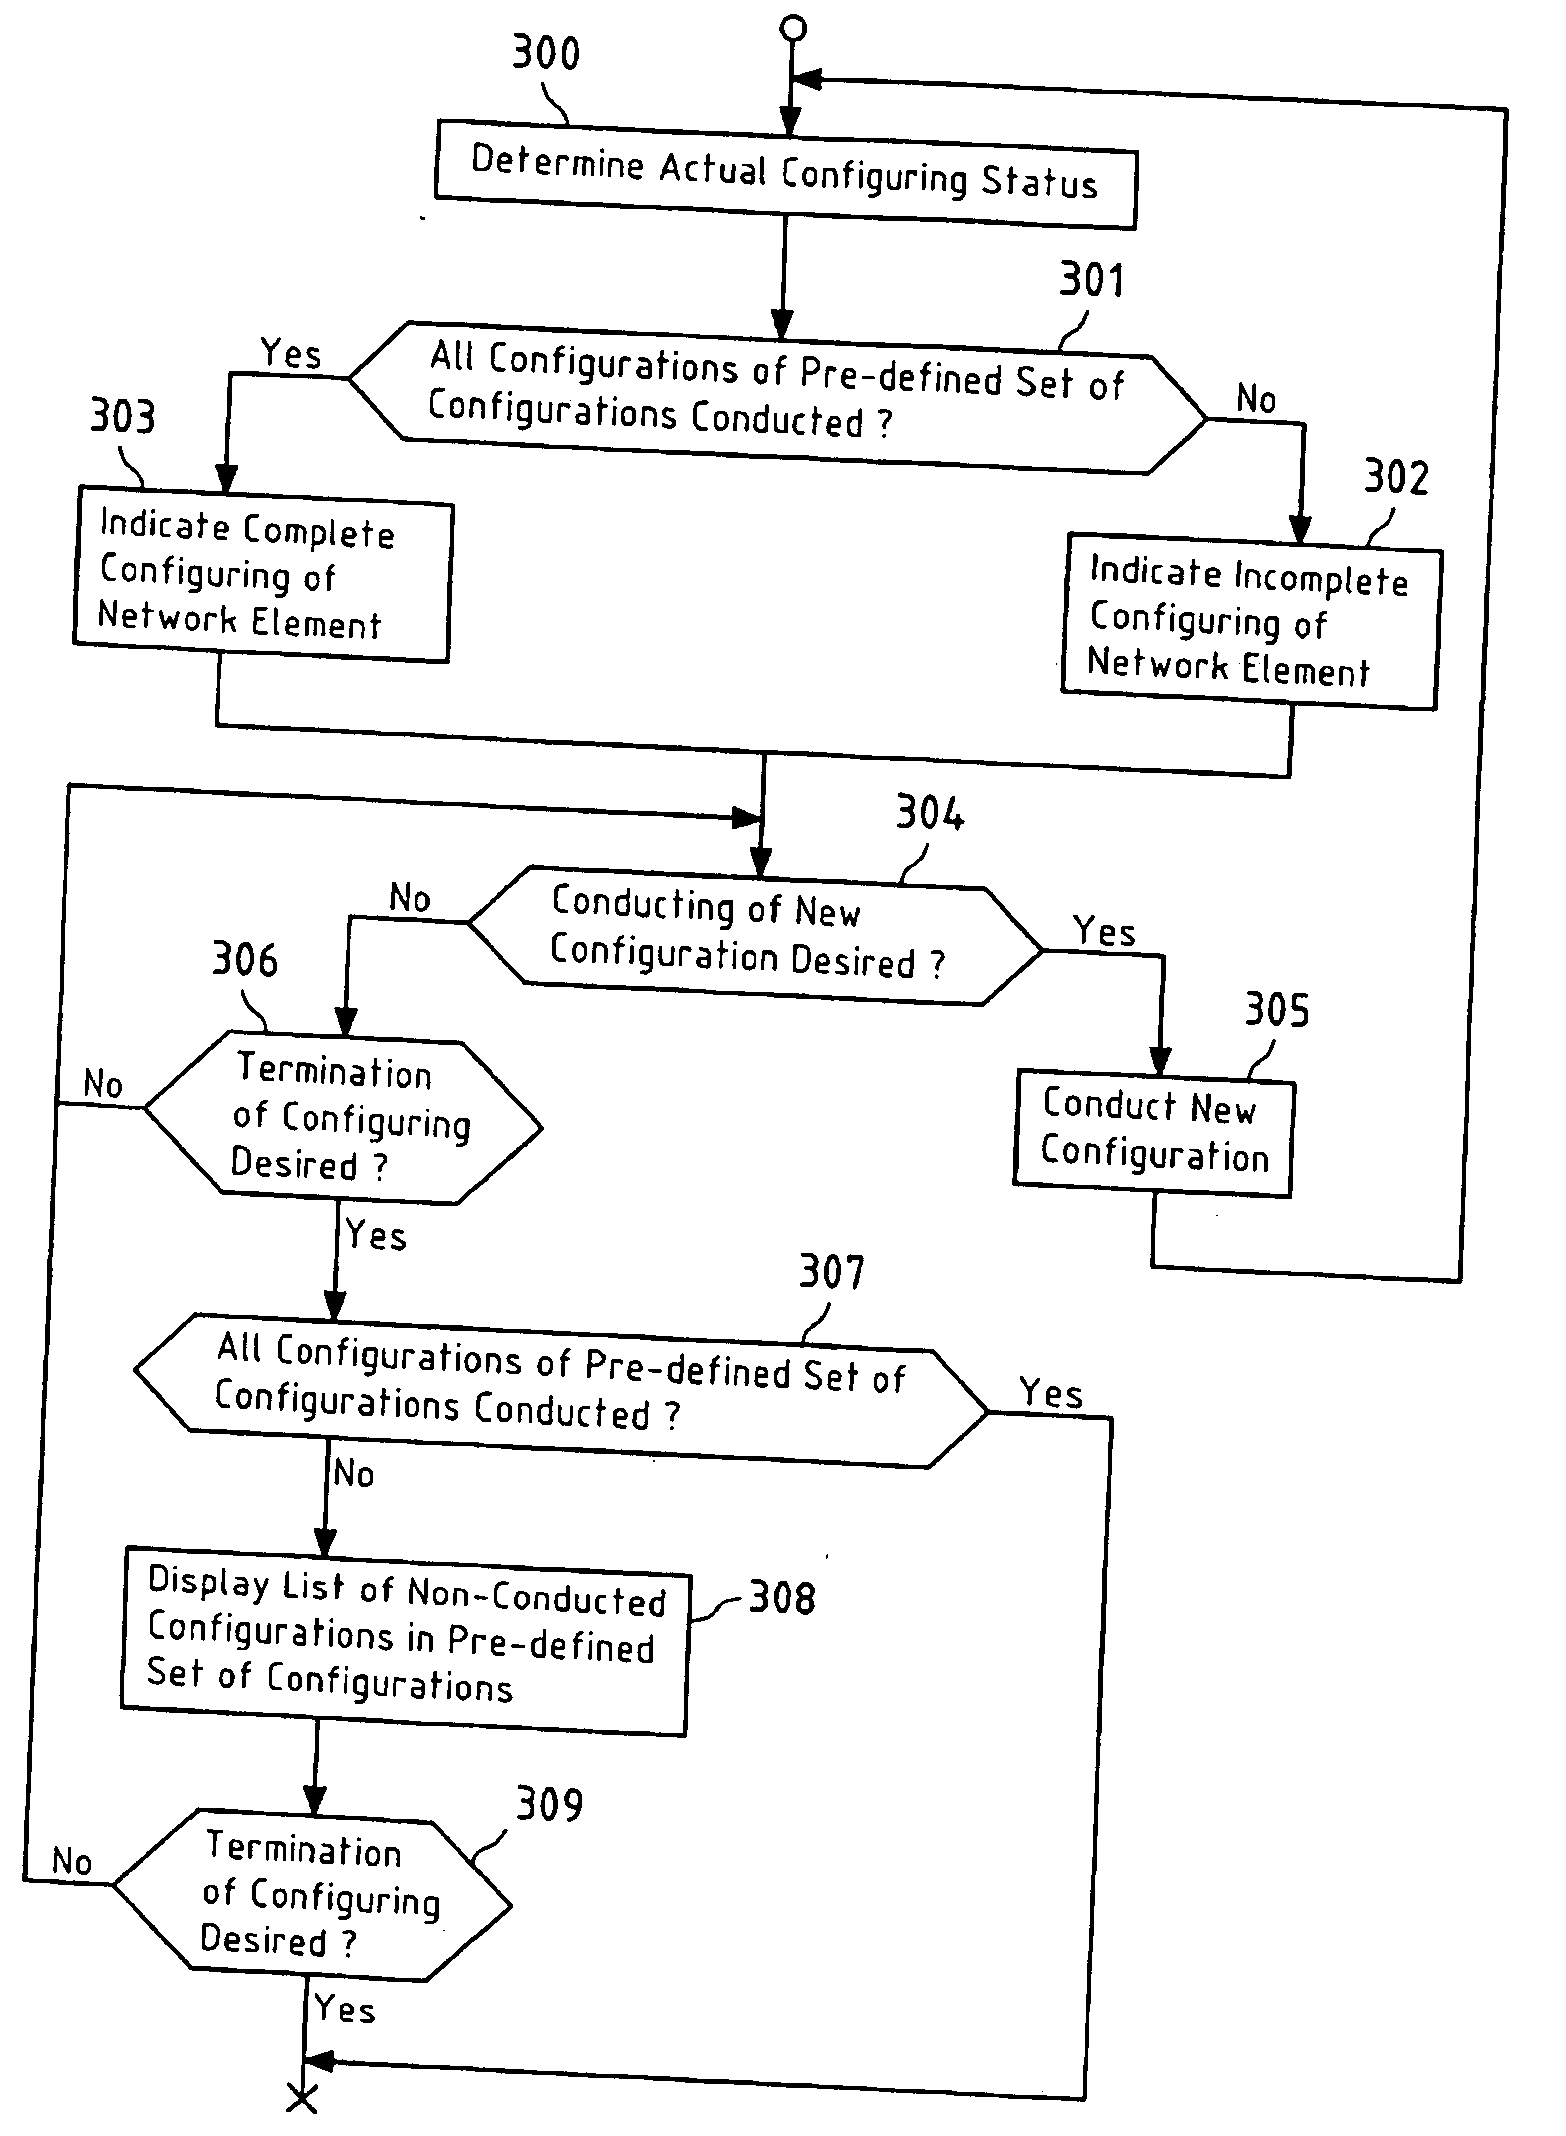 Indicating a configuring status